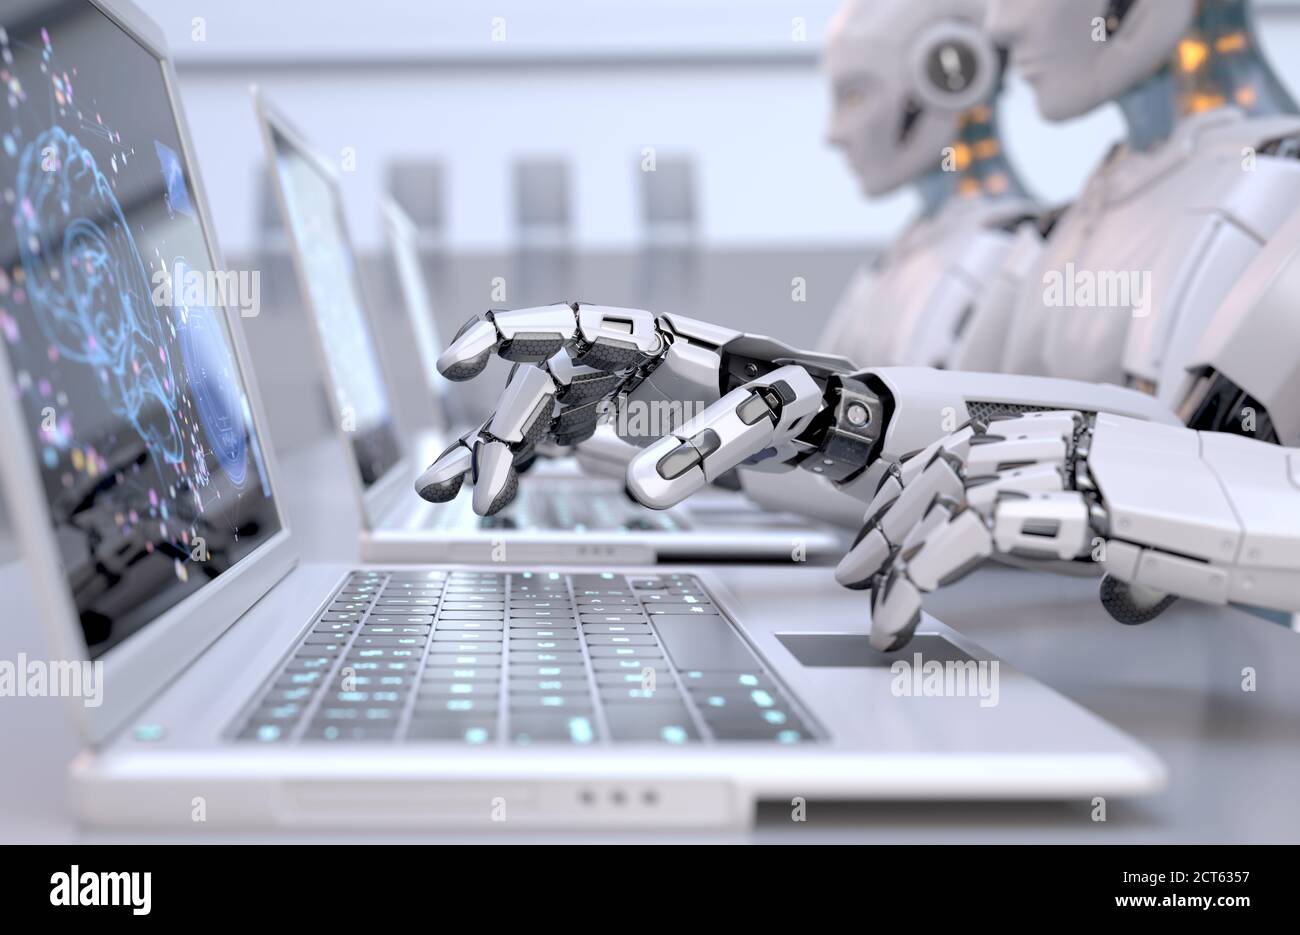 Robots working with laptops. 3D illustration Stock Photo